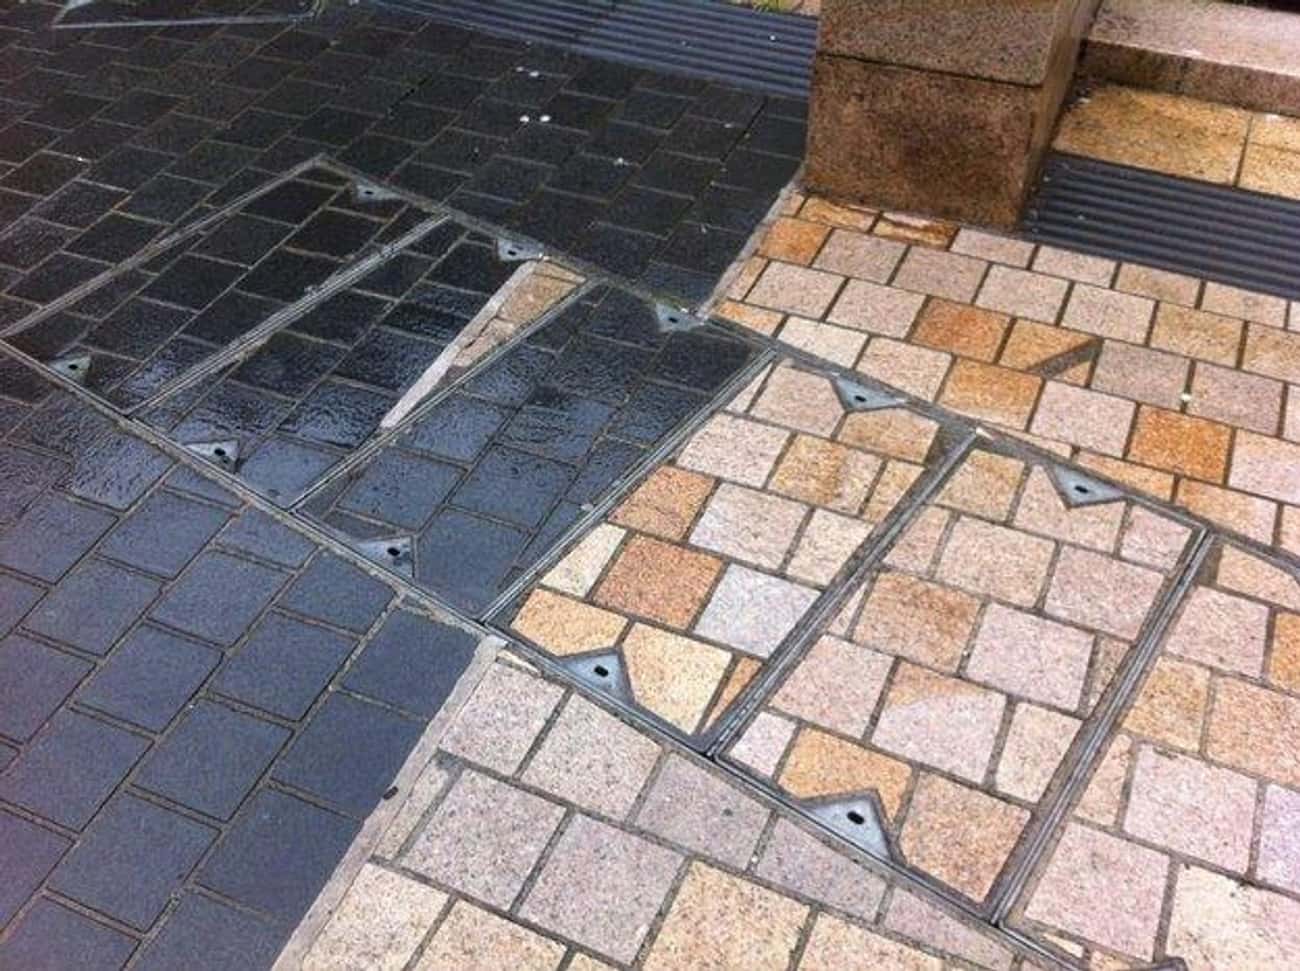 This Grate